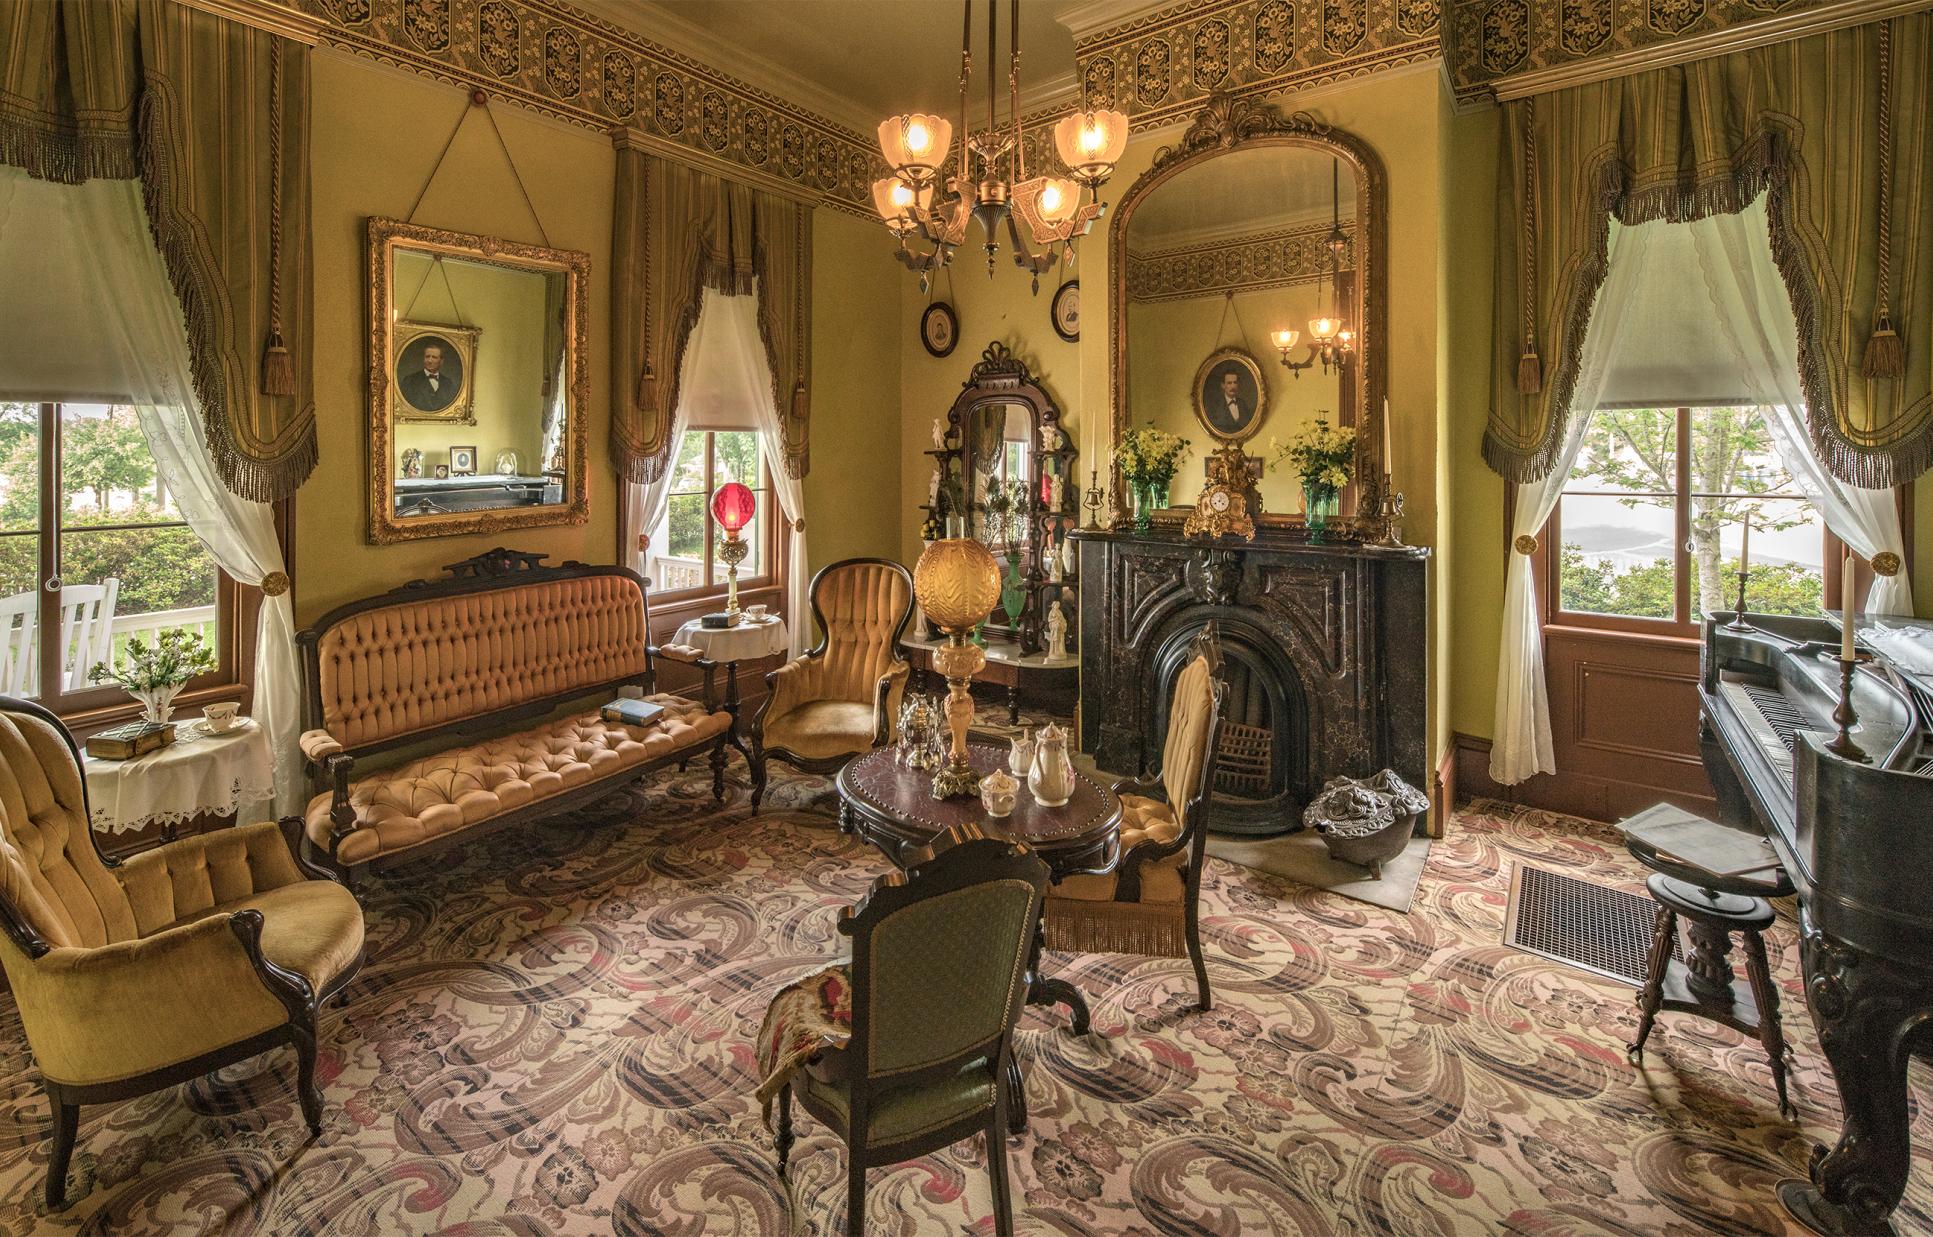 Parlor inside the Star Family Home